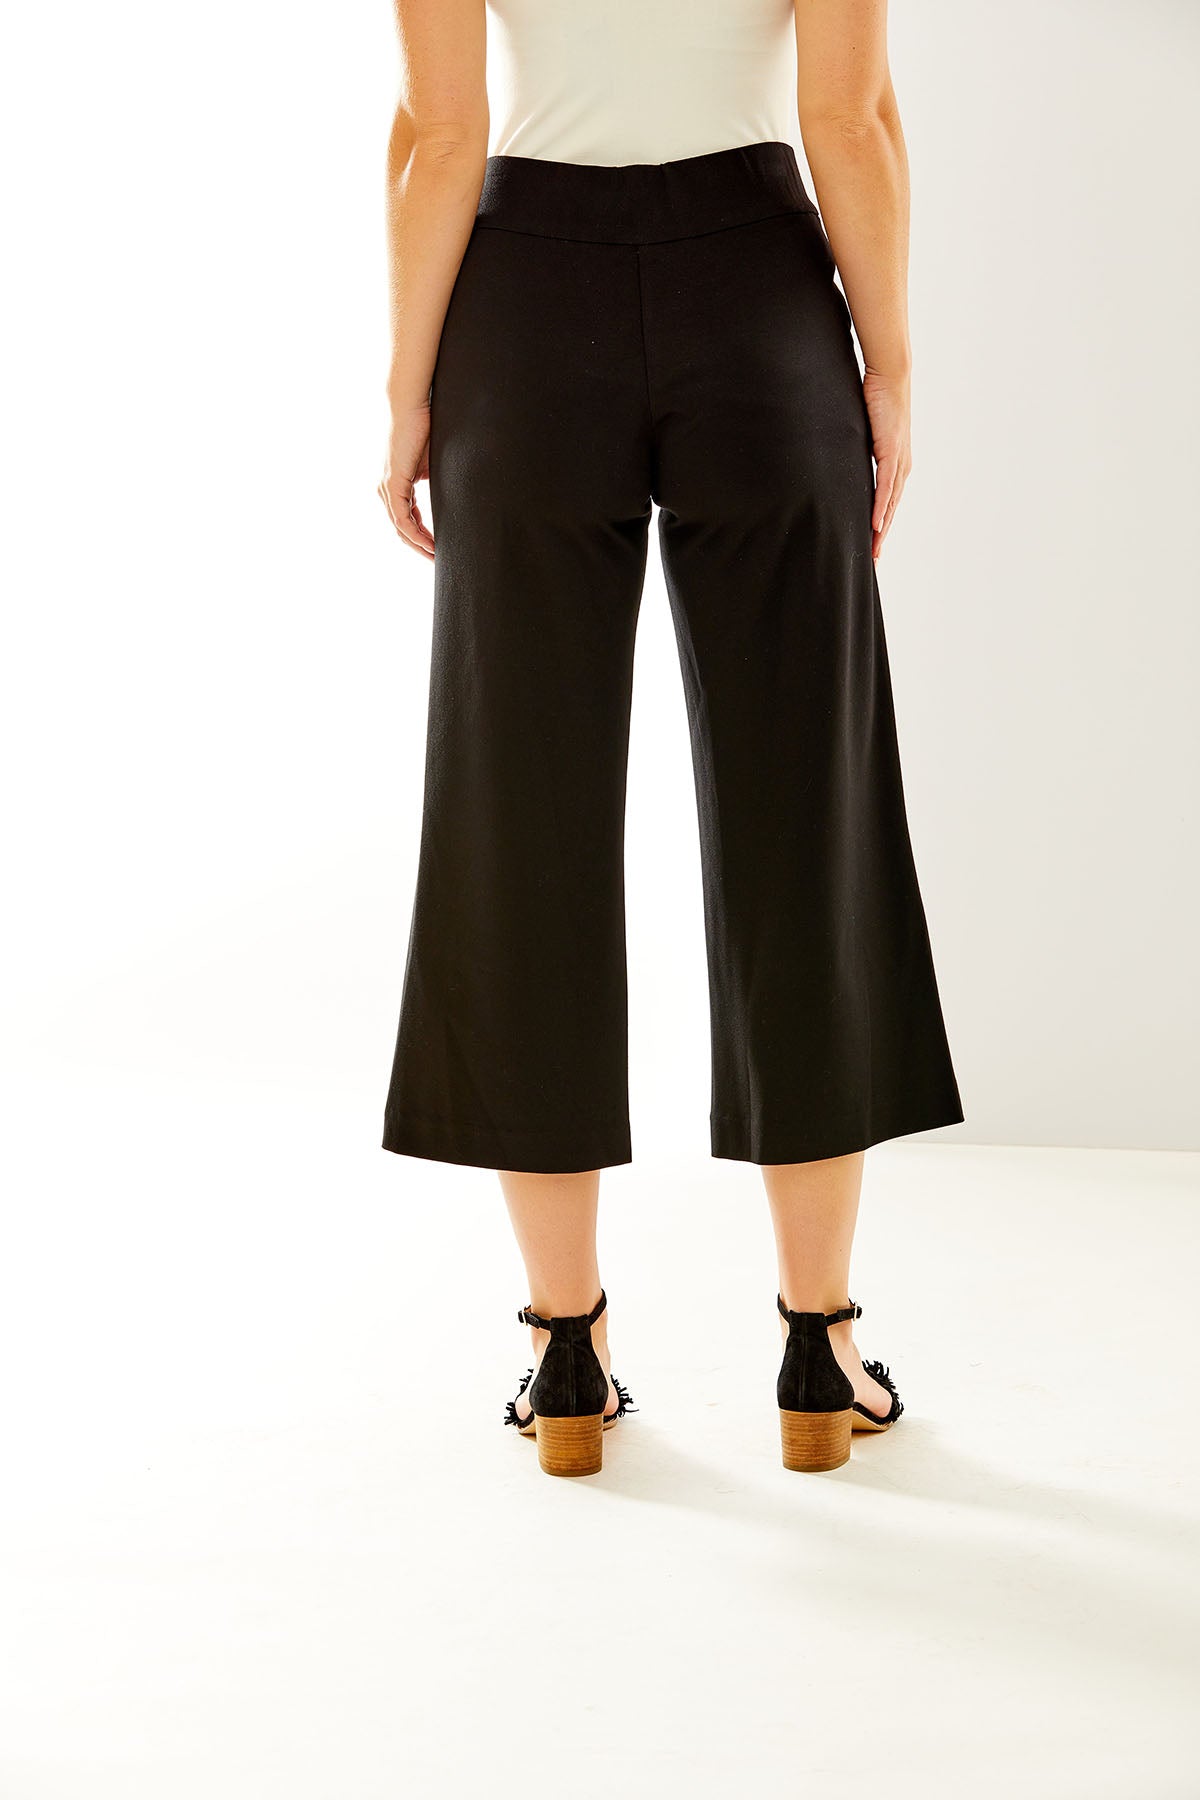 Woman in black cropped pants